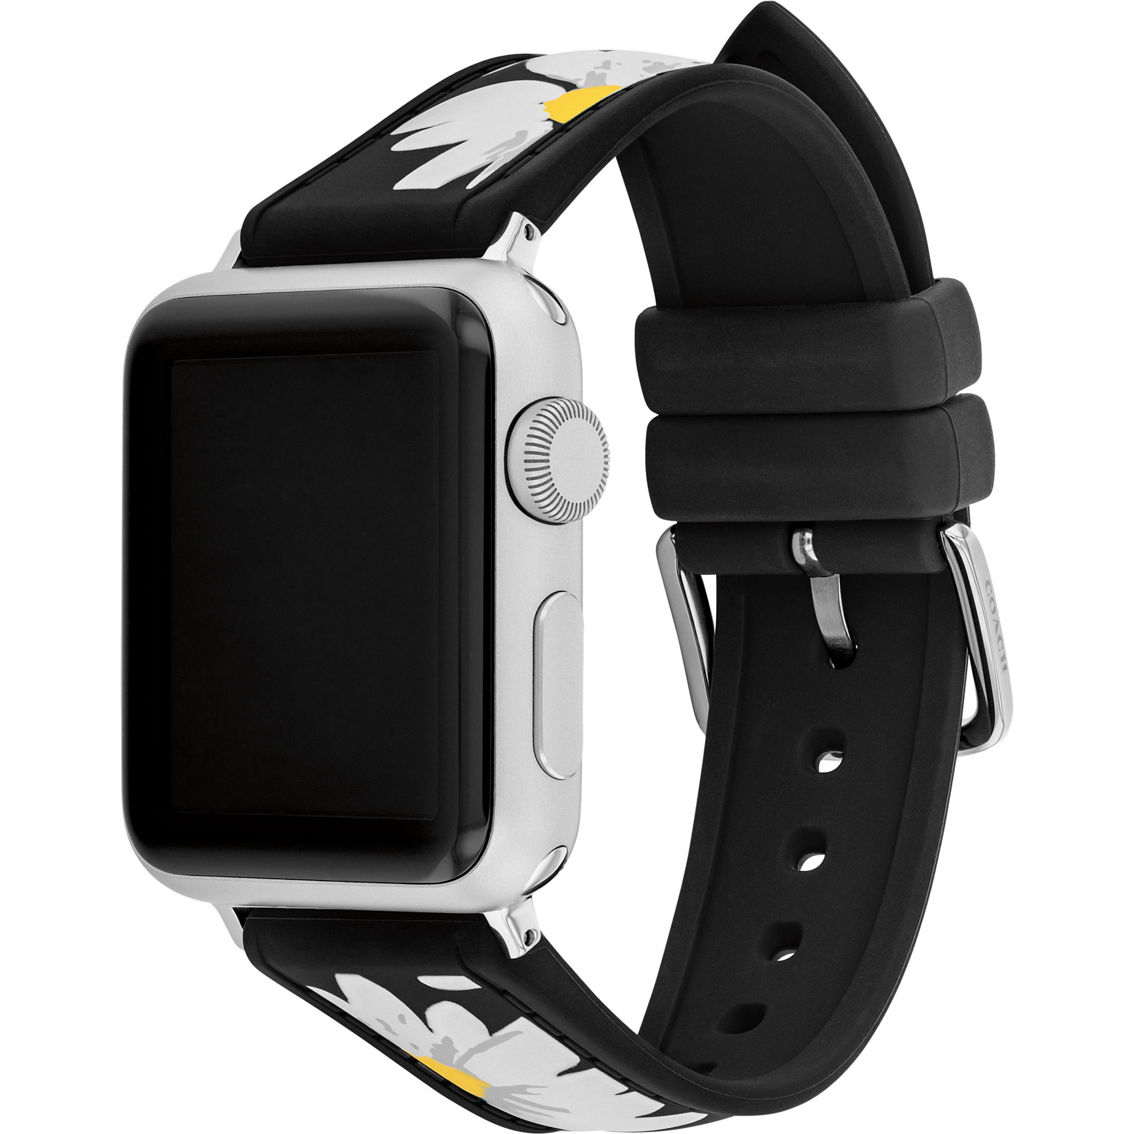 Coach Women's Apple Watch Black Silicone Strap - Image 4 of 4